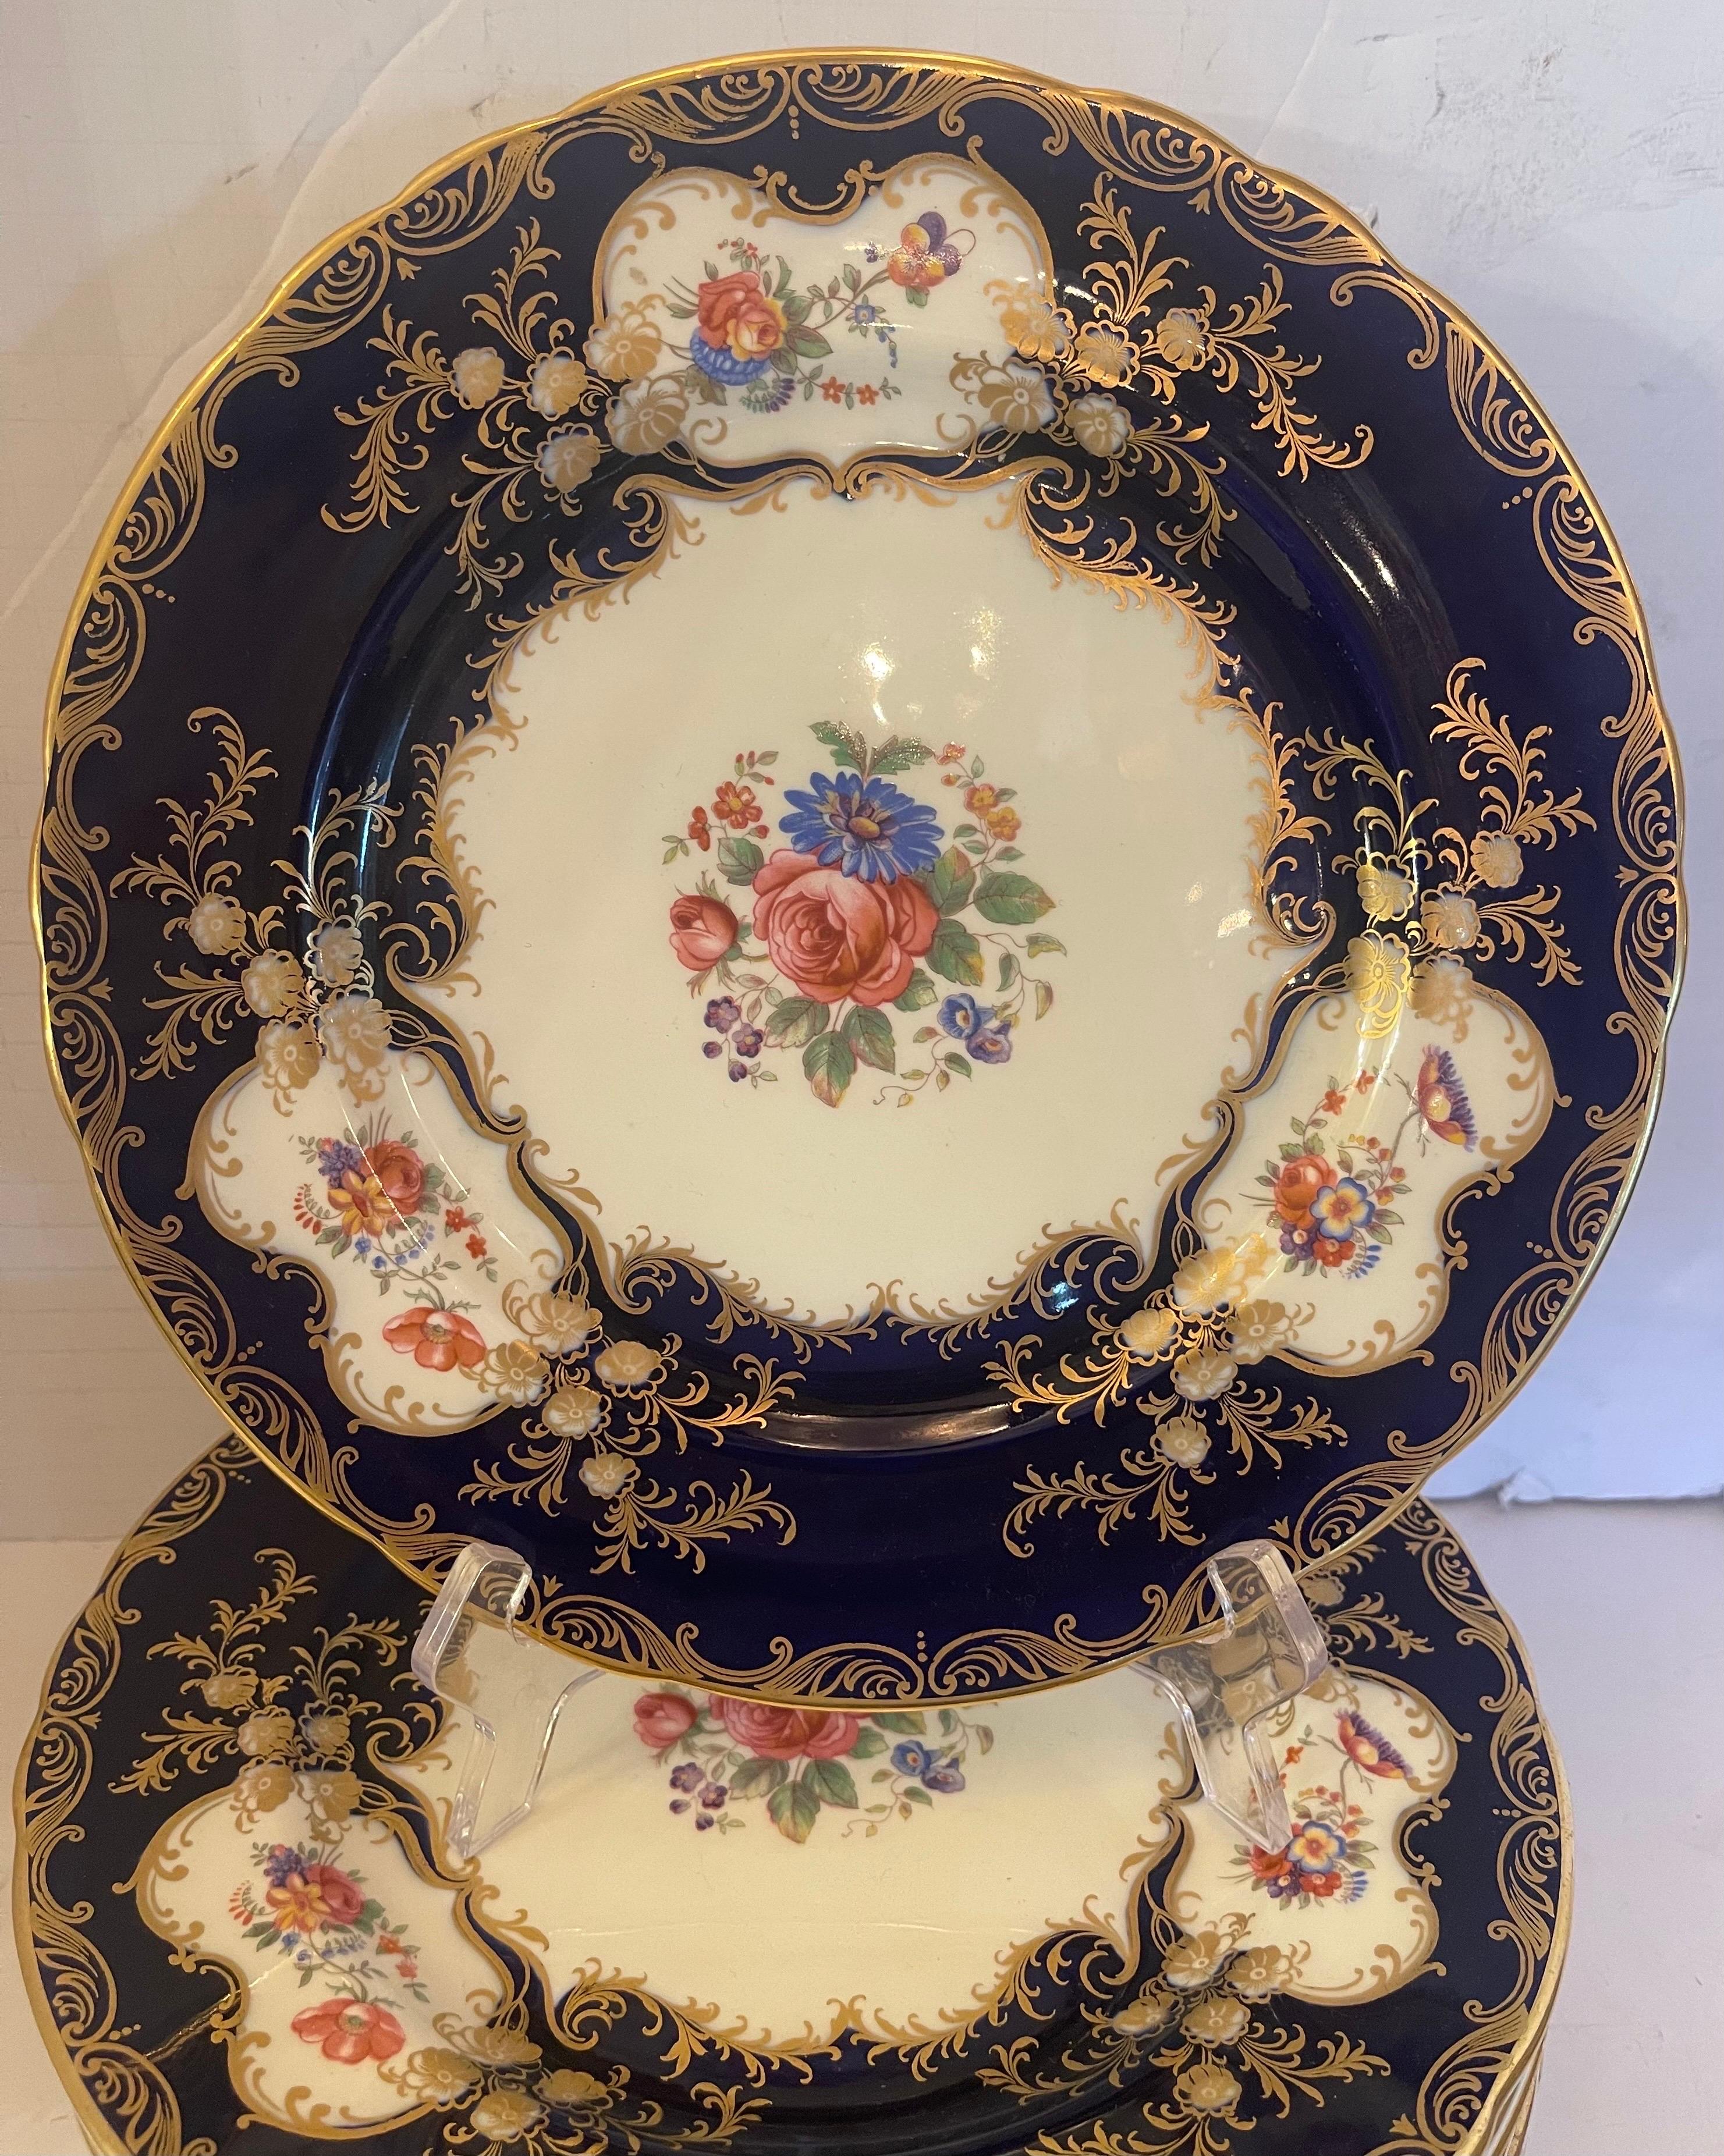 A Wonderful Floral Pattern Service 12 For Dinner Porcelain Plates By Aynsley Bavaria